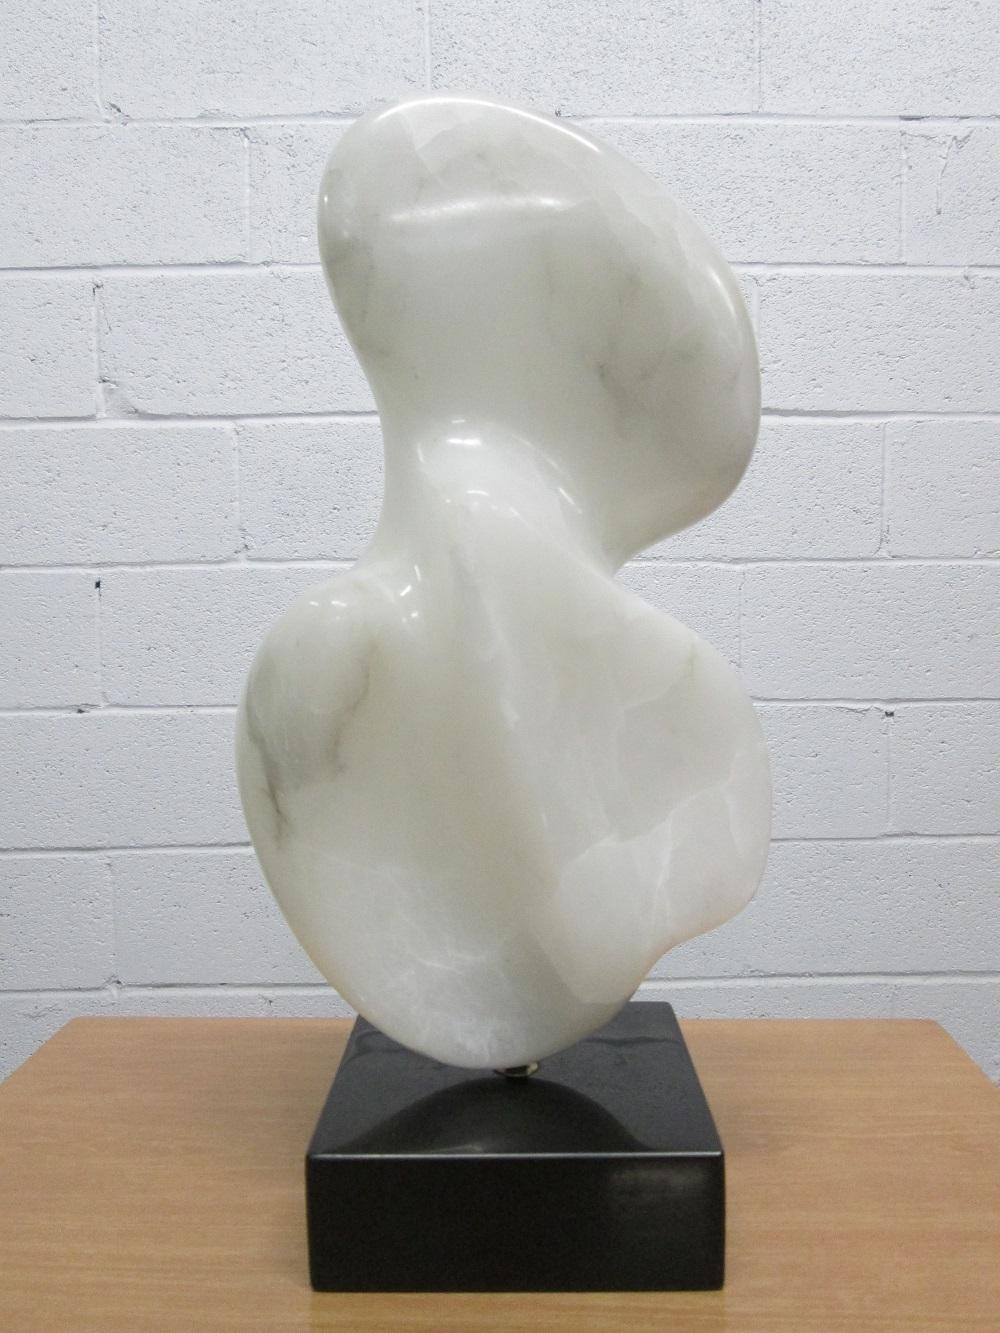 Organic form alabaster sculpture on a stone base which allows the sculpture to rotate easily.